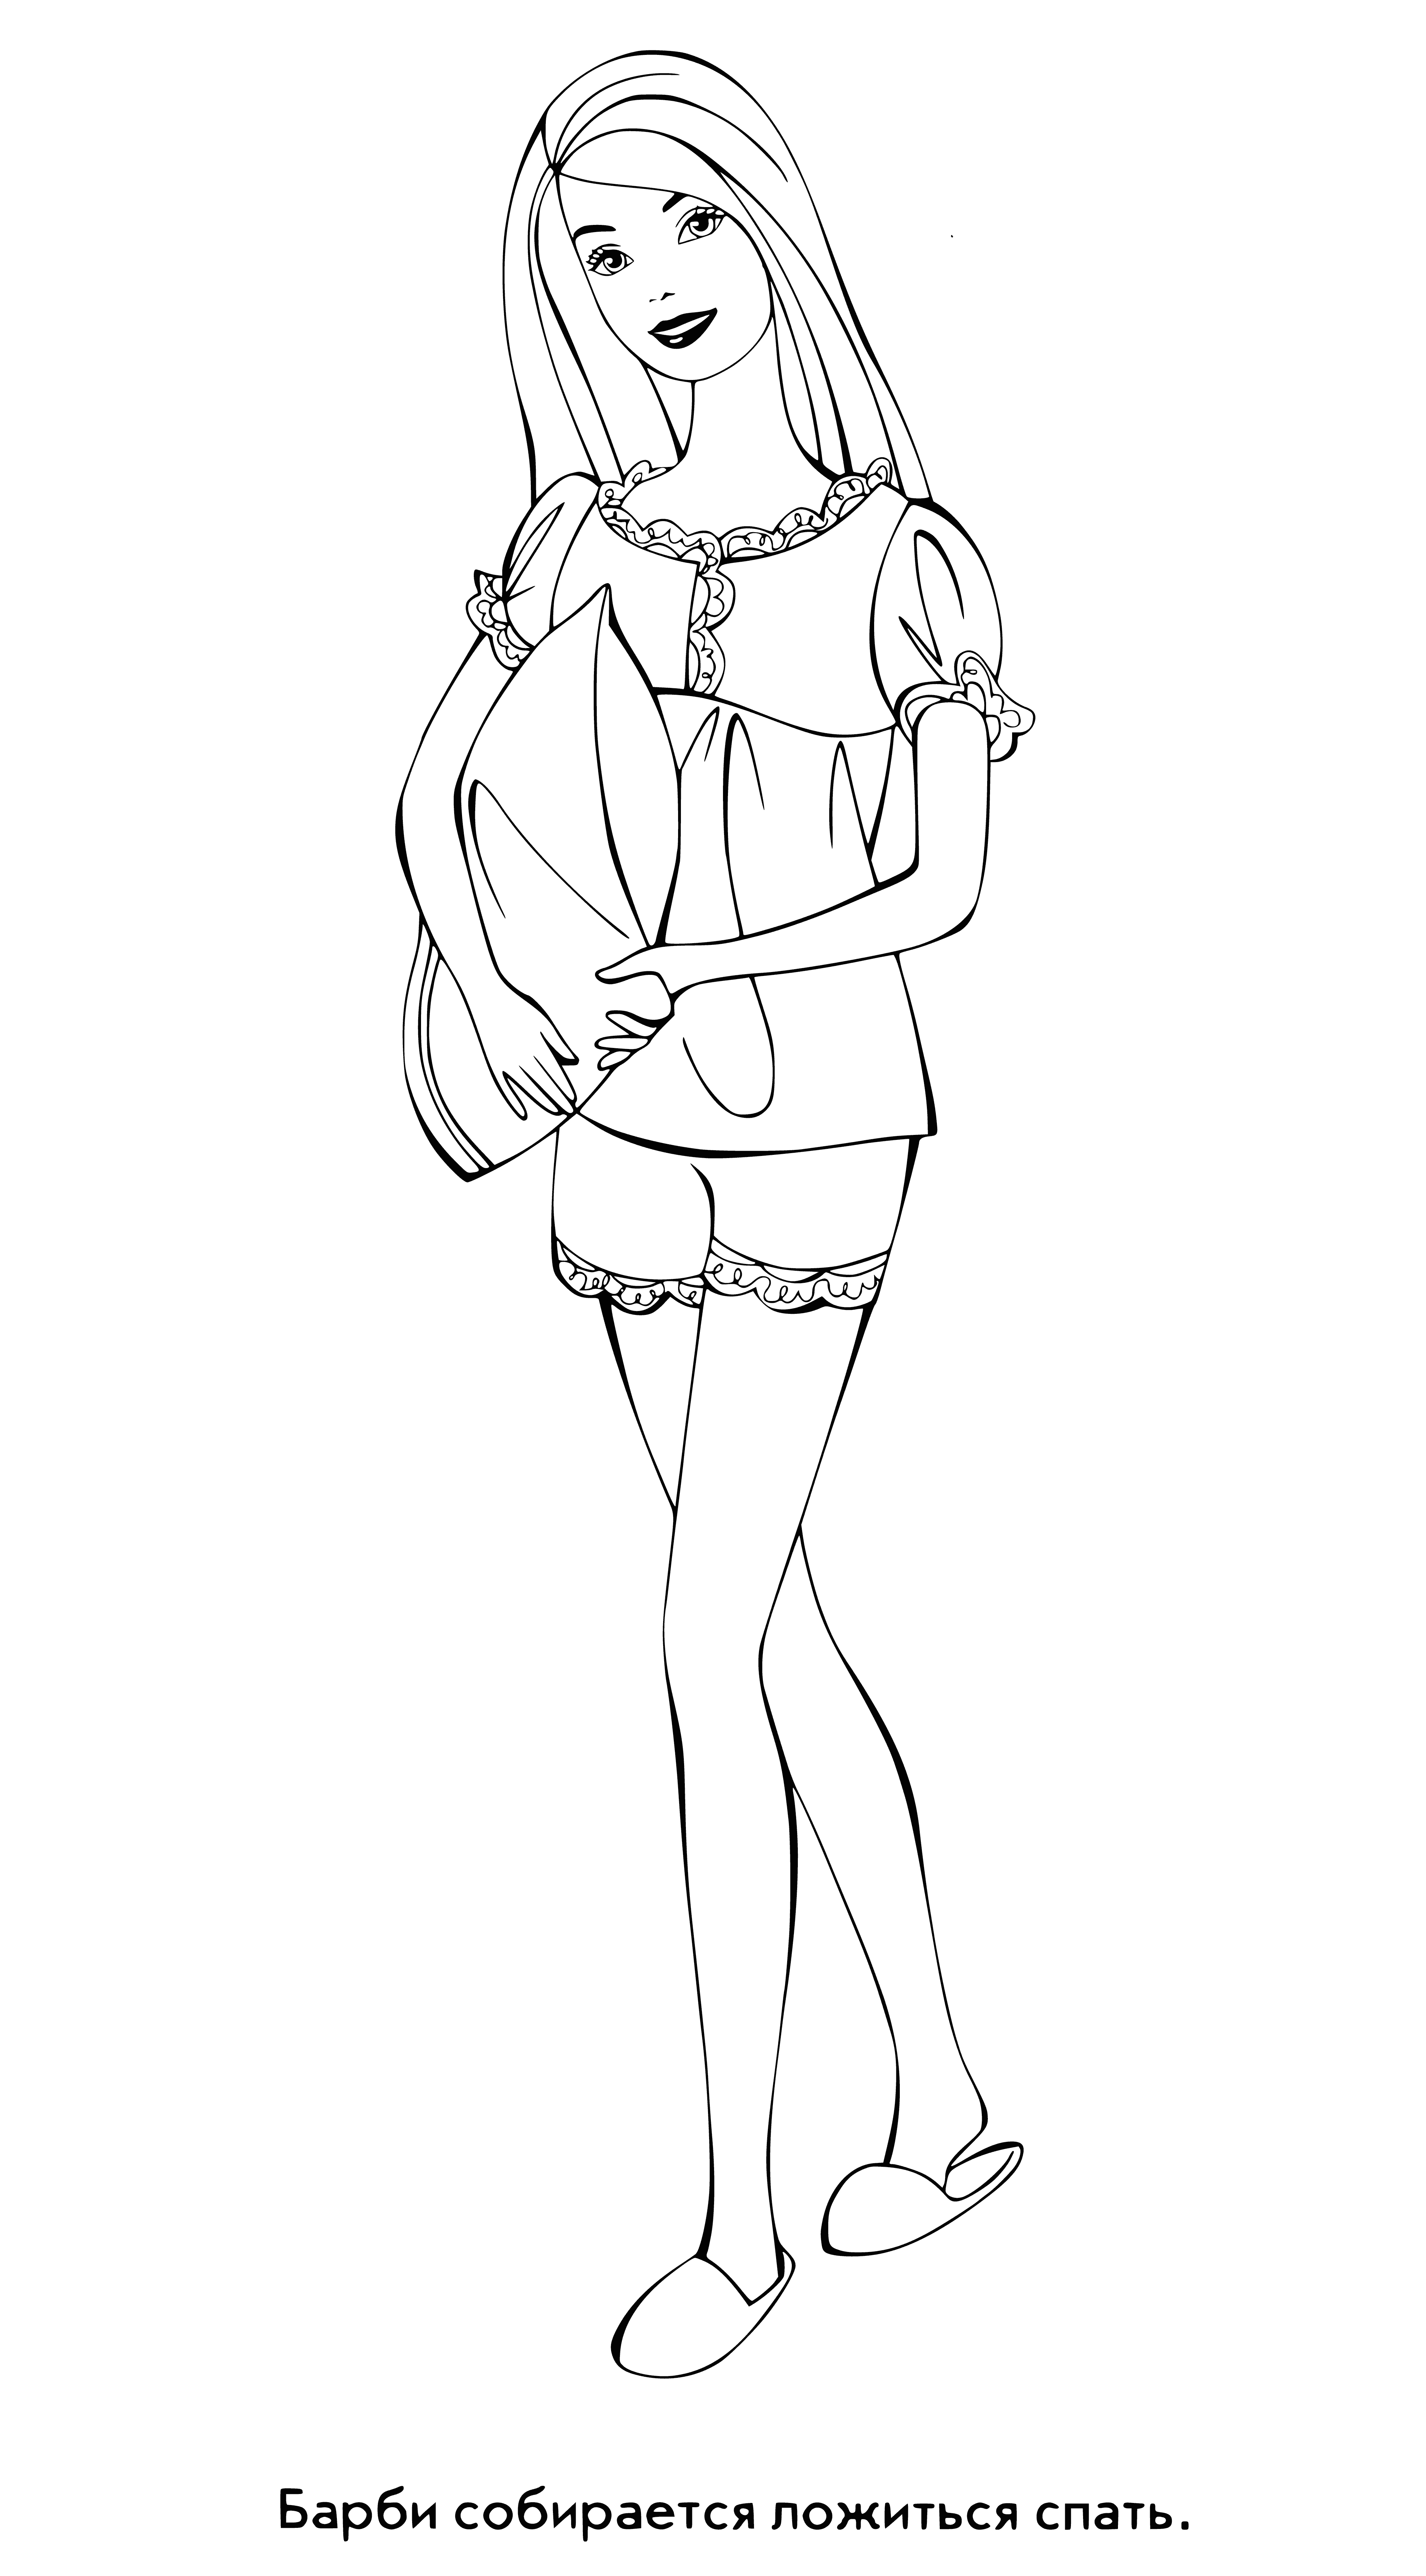 Barbie goes to bed coloring page